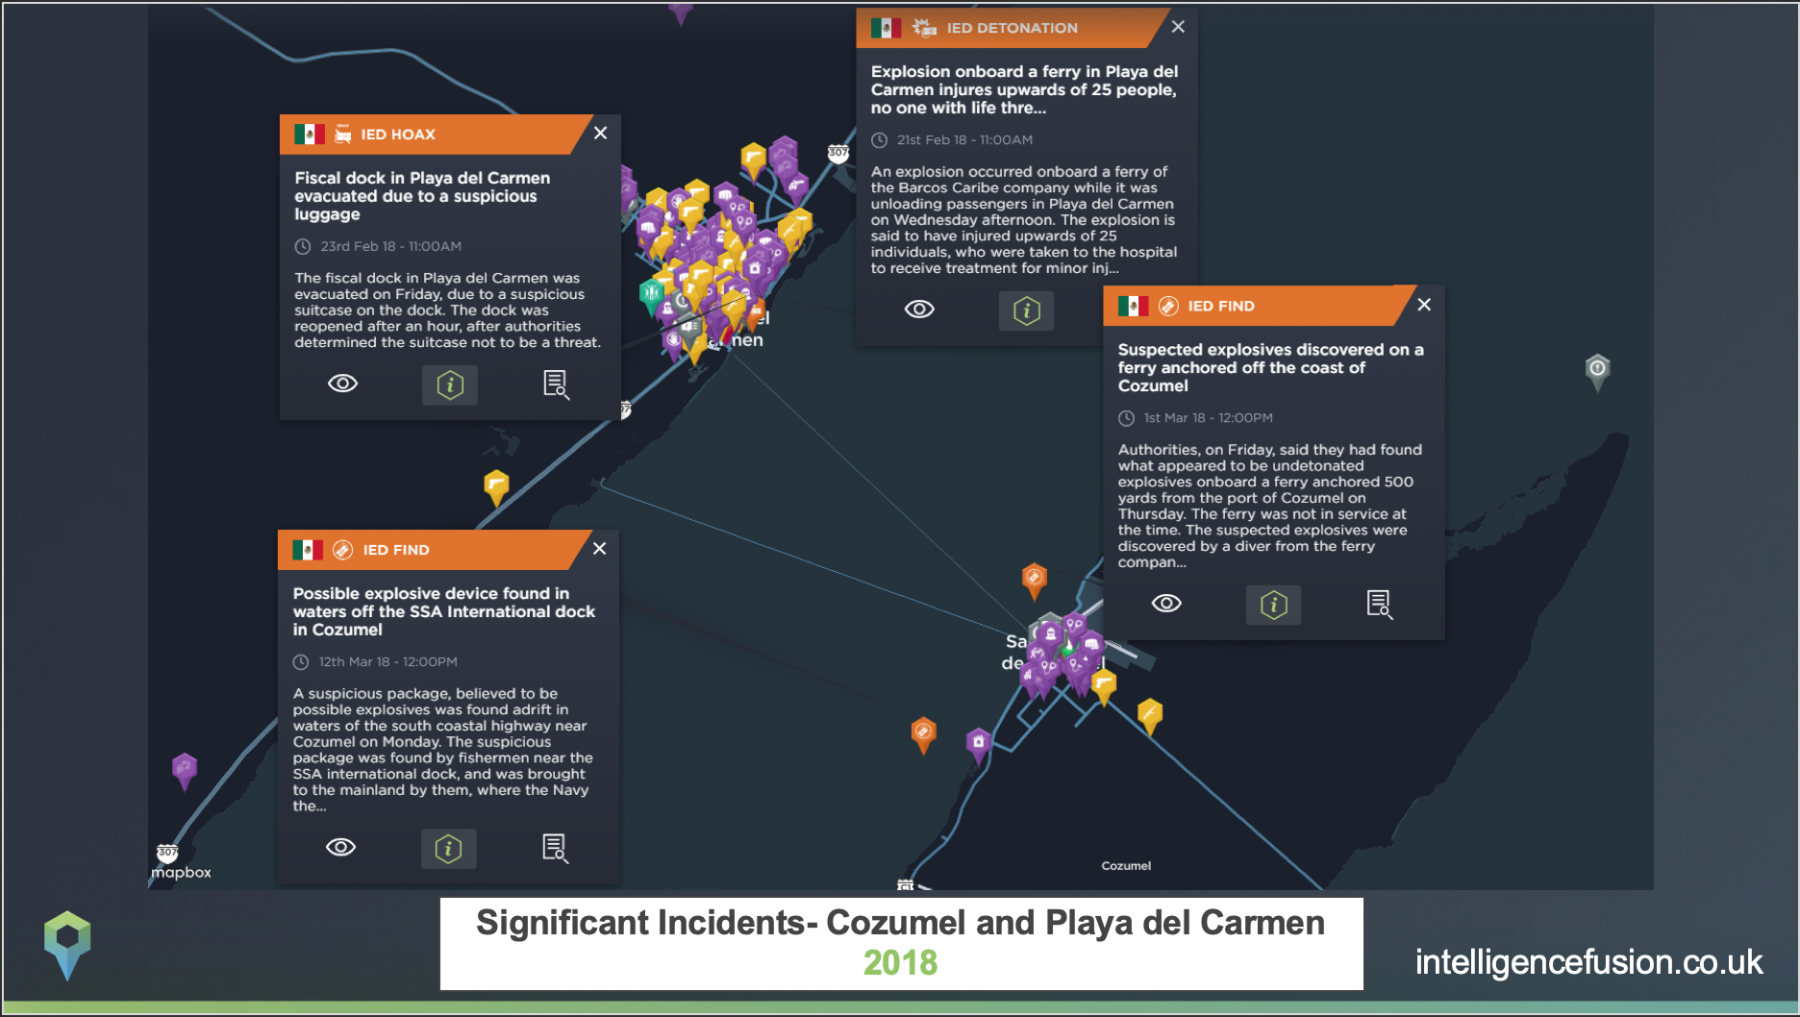 Significant incidents plotted on a map that affect the Caribbean cruise industry in Cozumel and Playa del Carmen